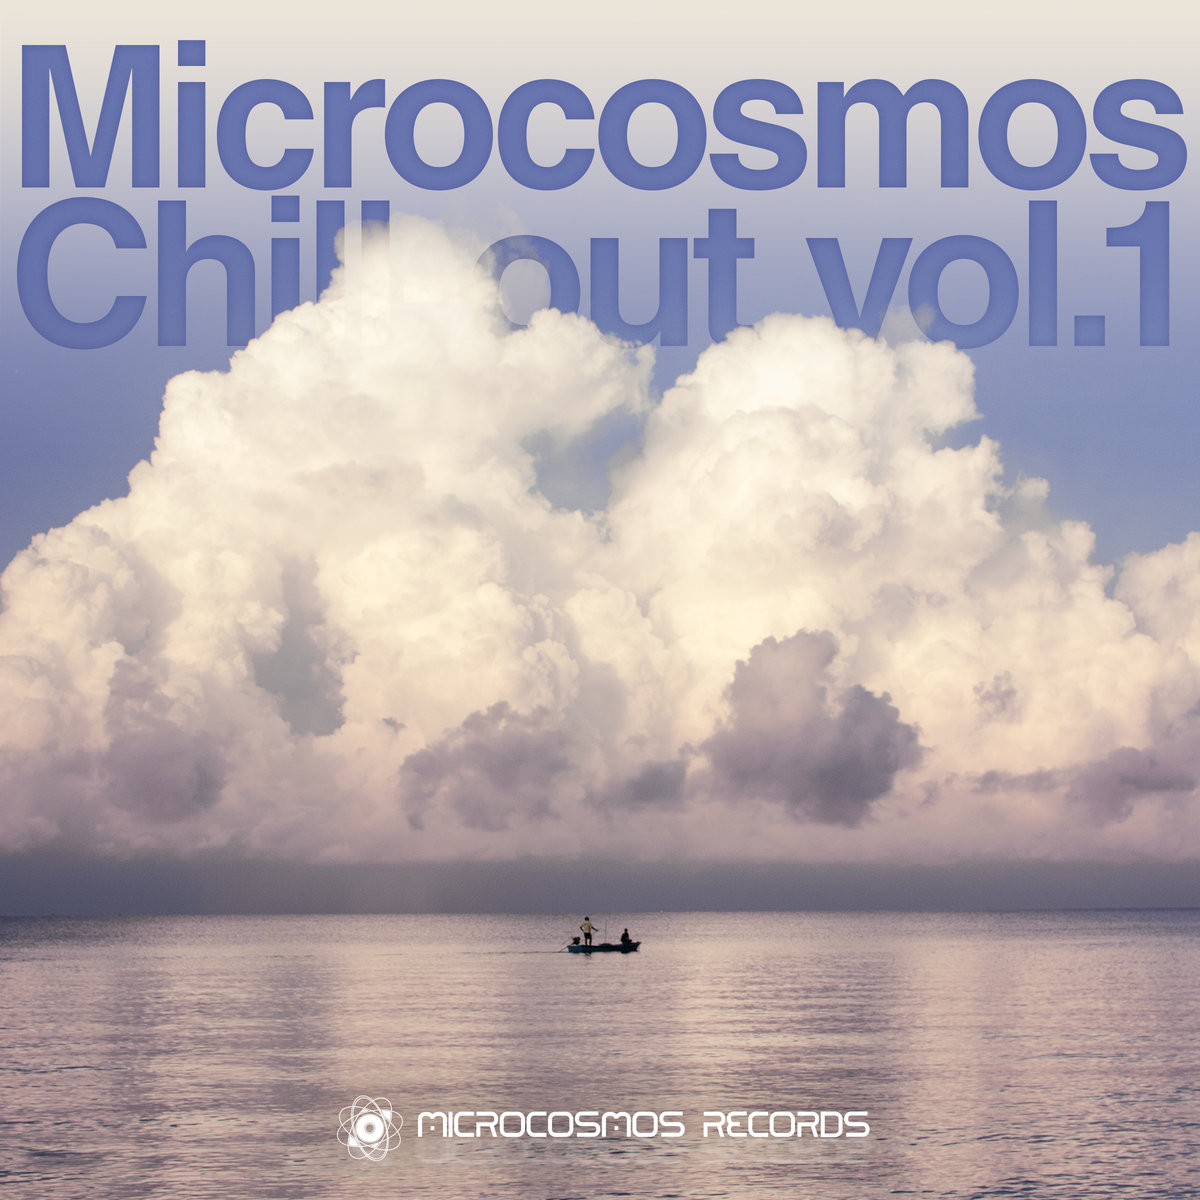 Astronaut Ape - Floating In The Sky @ 'Various Artists - Microcosmos Chill-out Vol.1' album (ambient, chill-out)